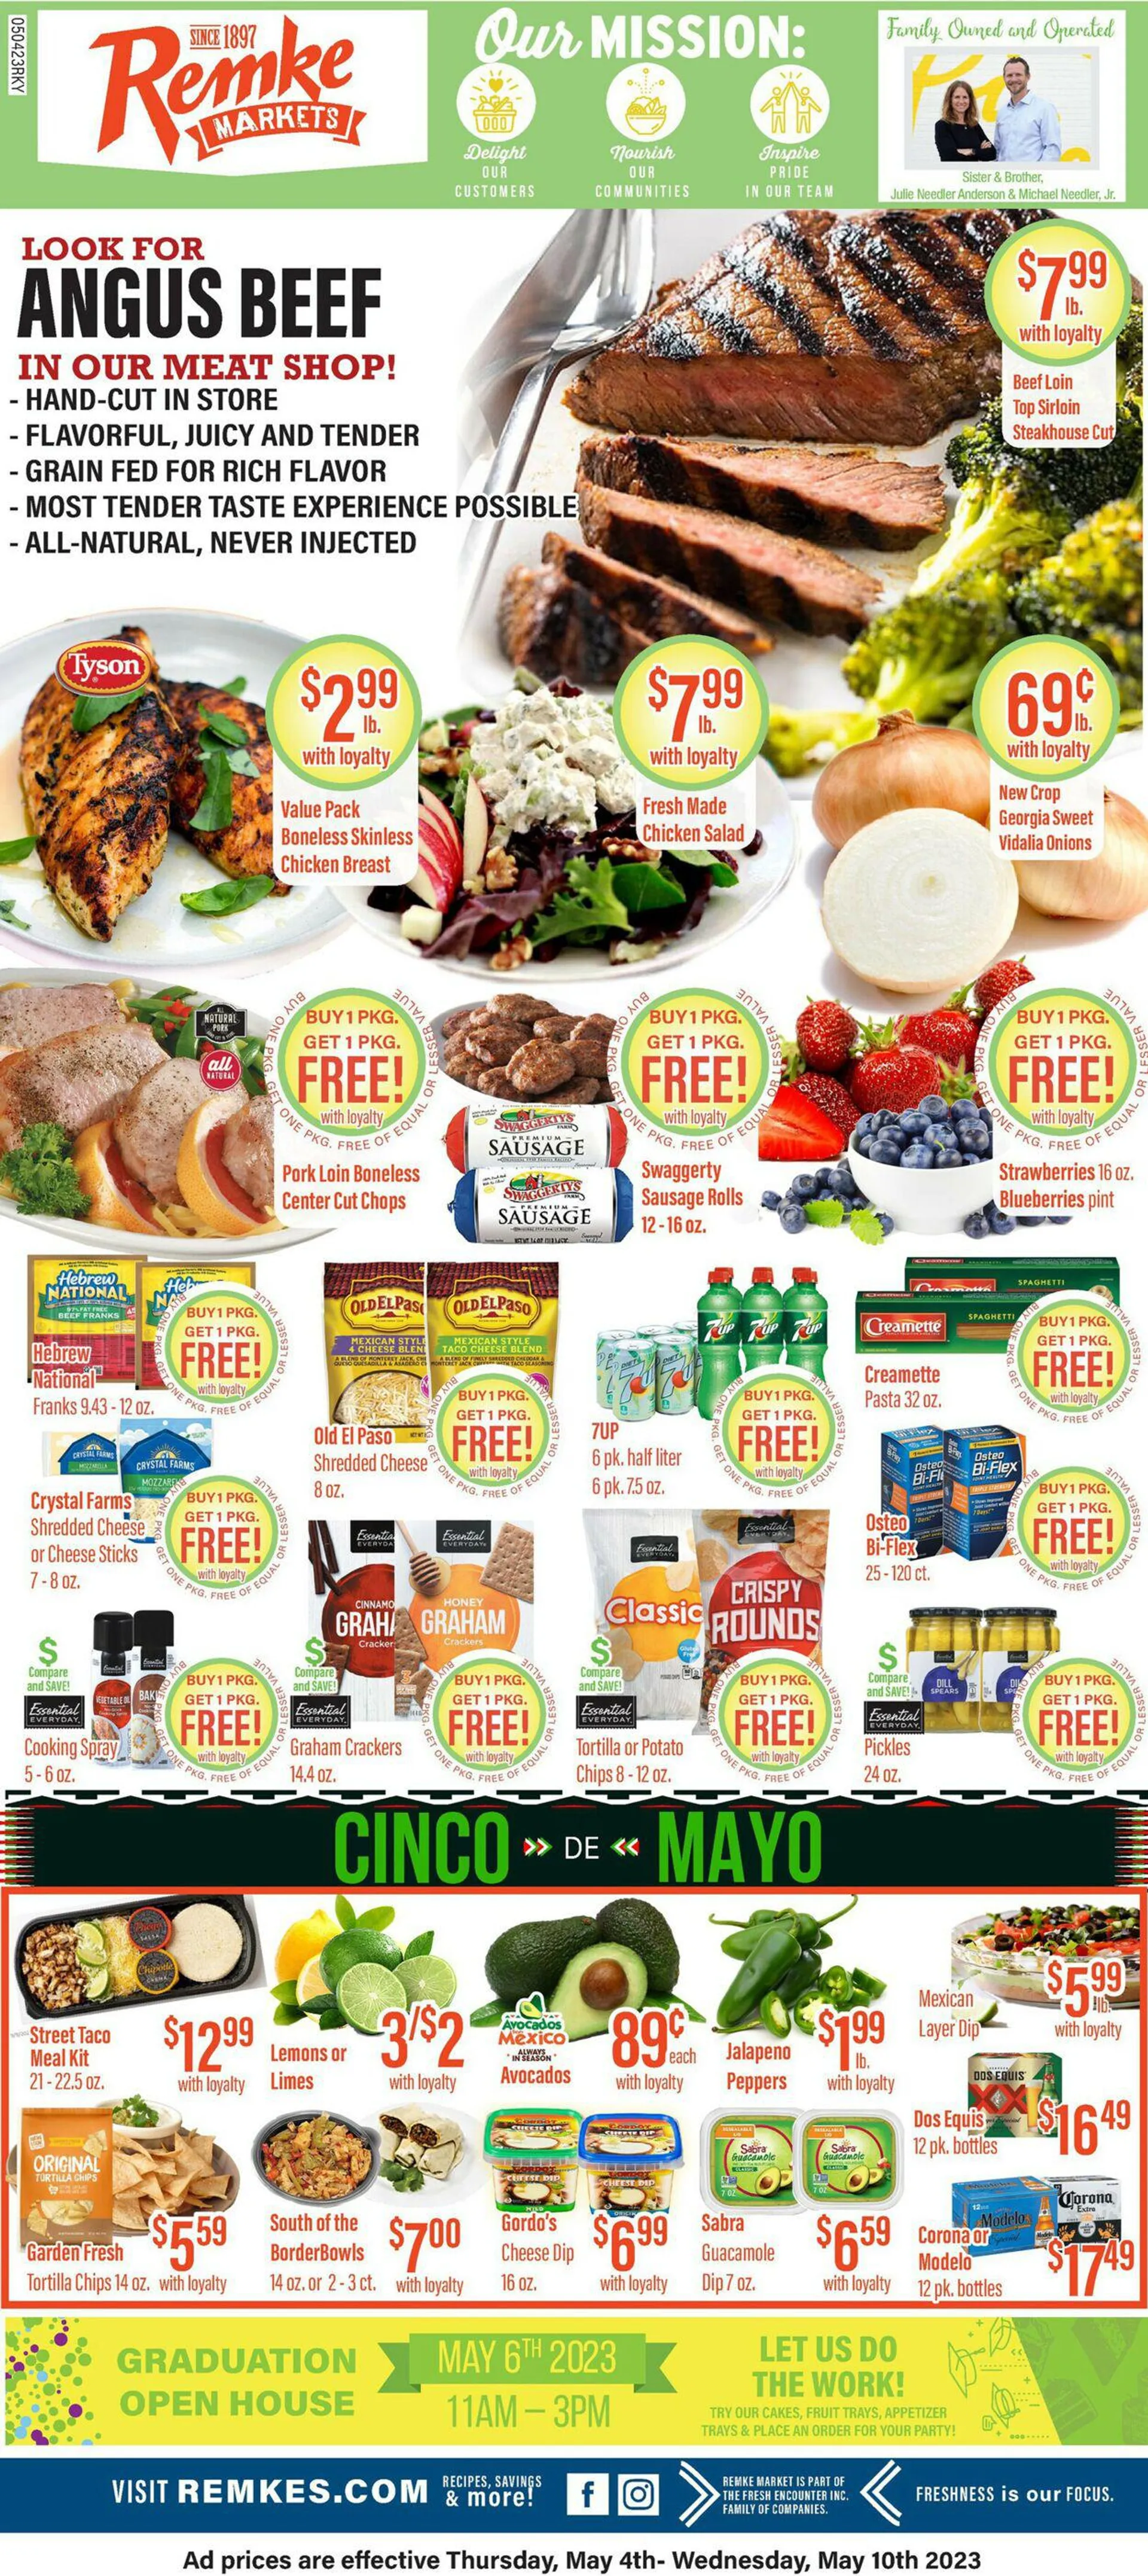 Remke Markets Current weekly ad - 2